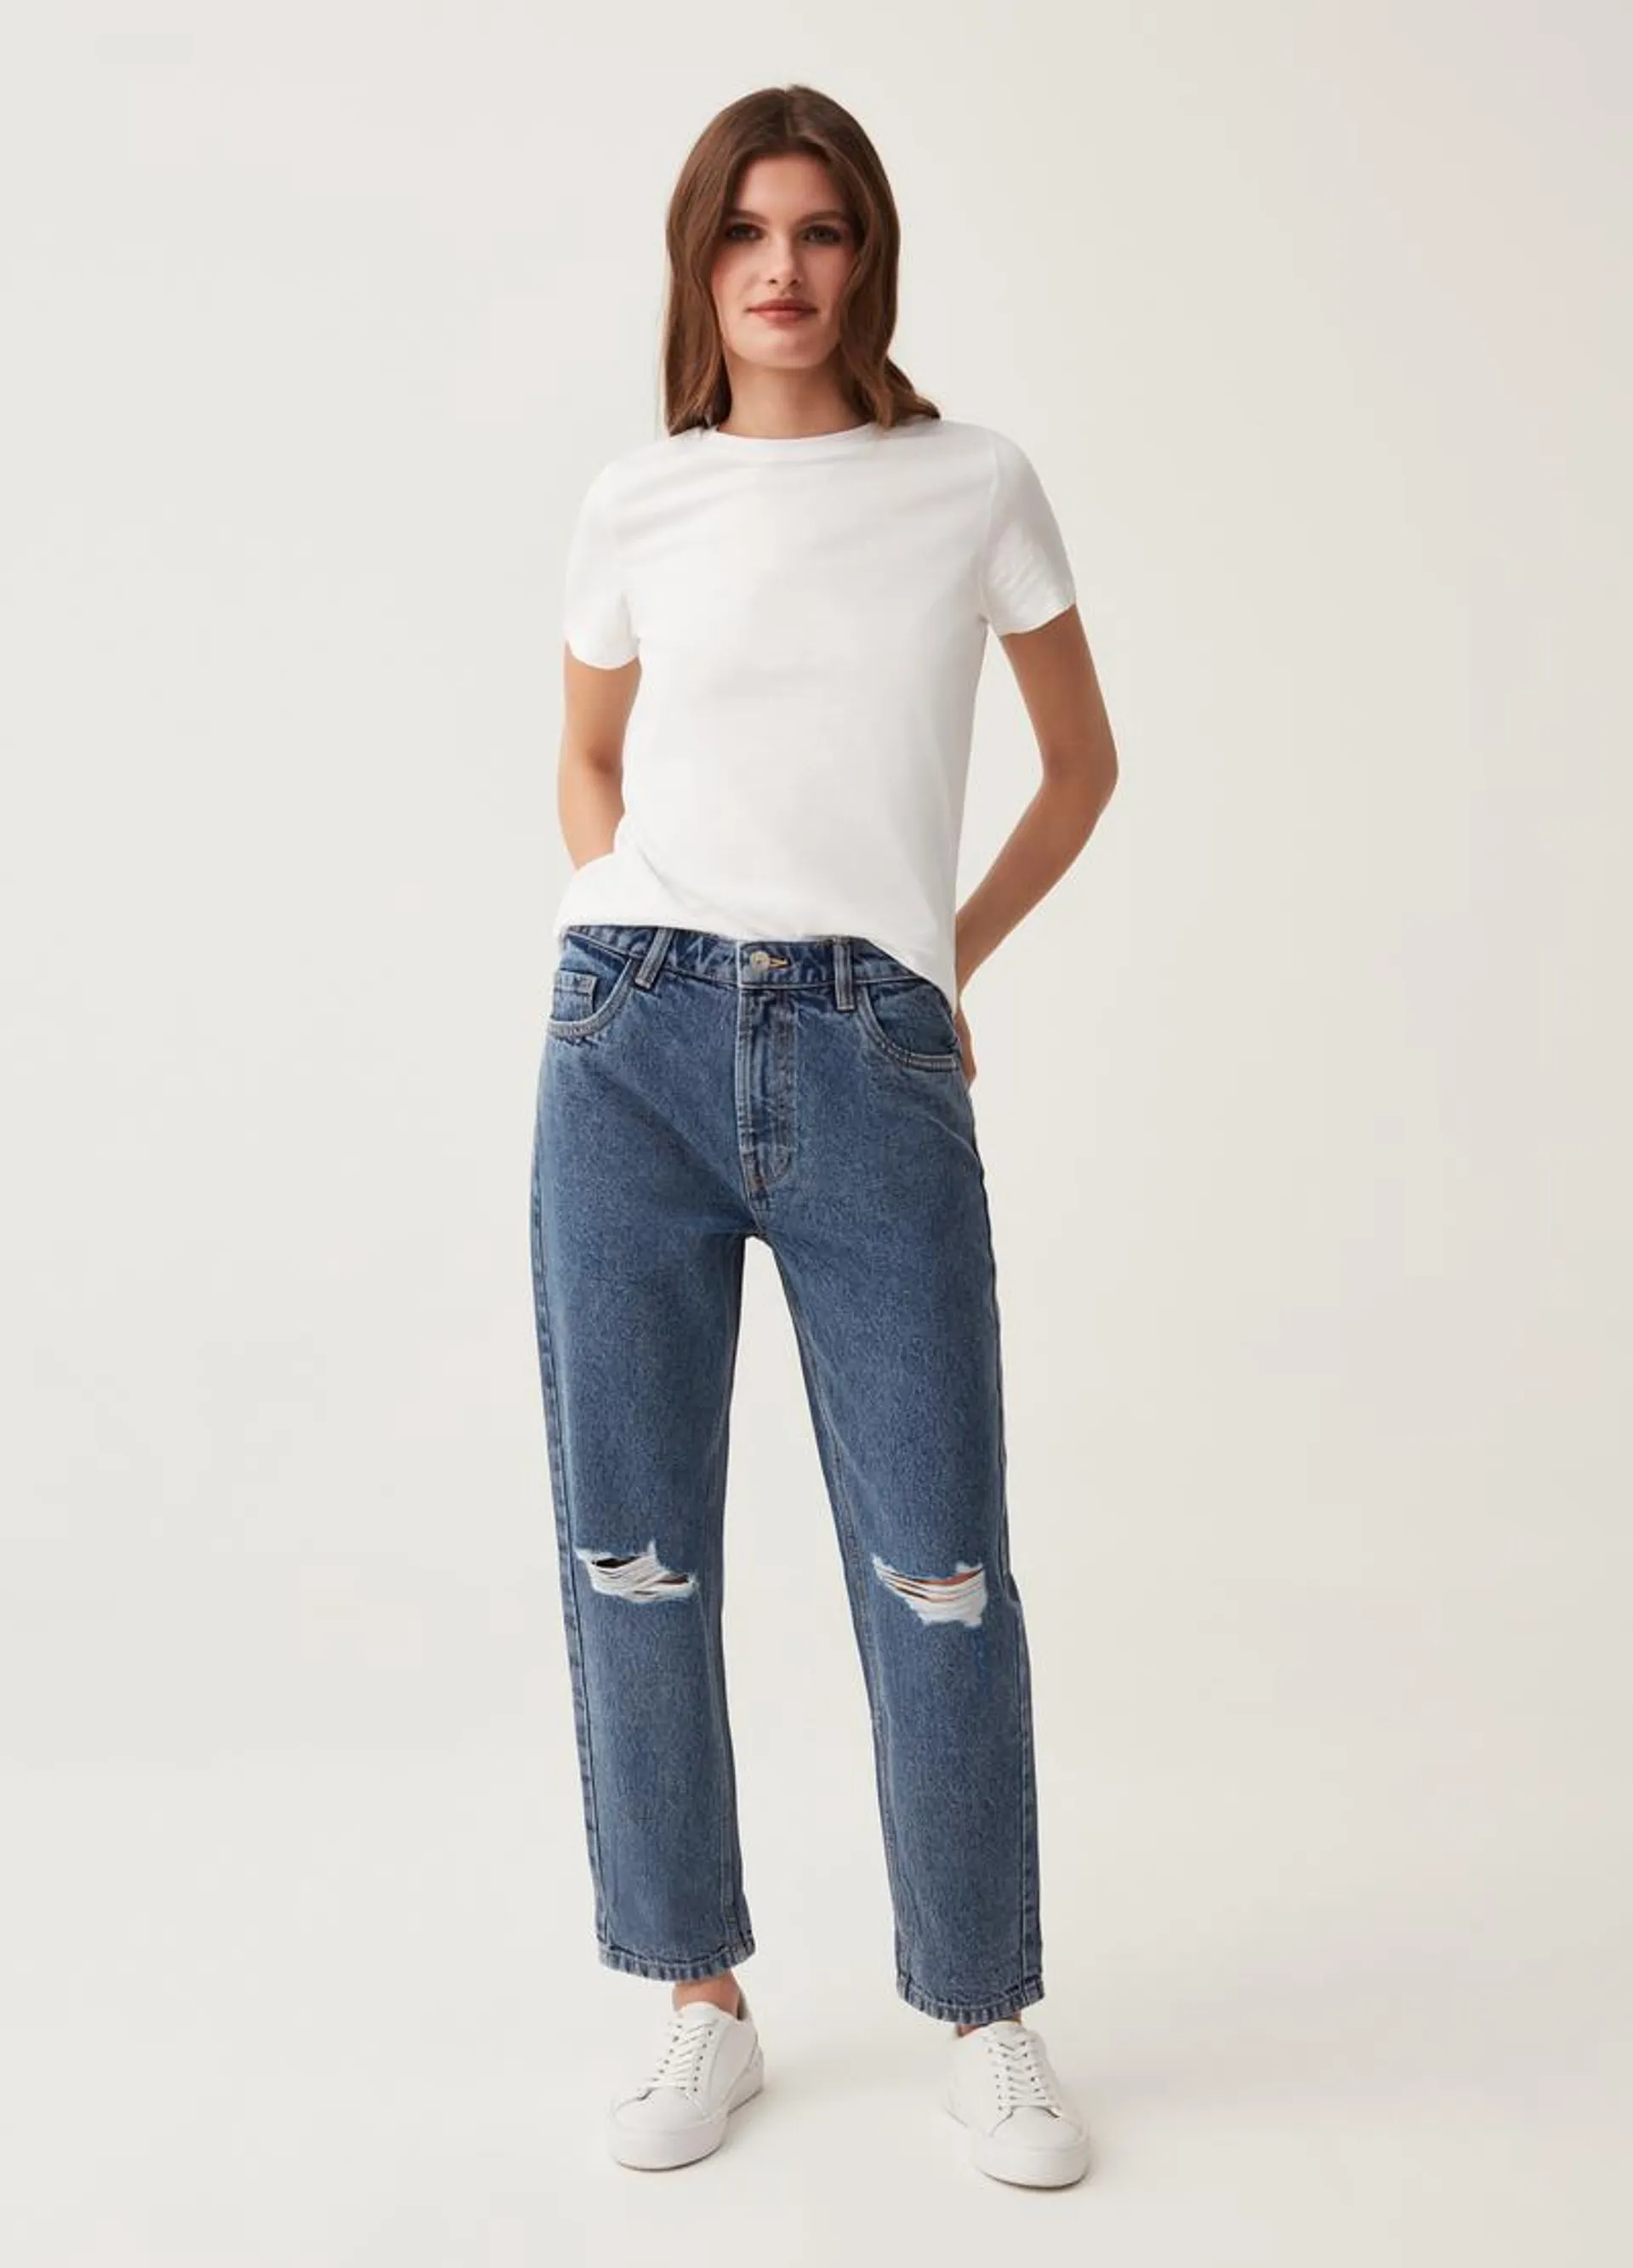 Mum-fit jeans with abrasions